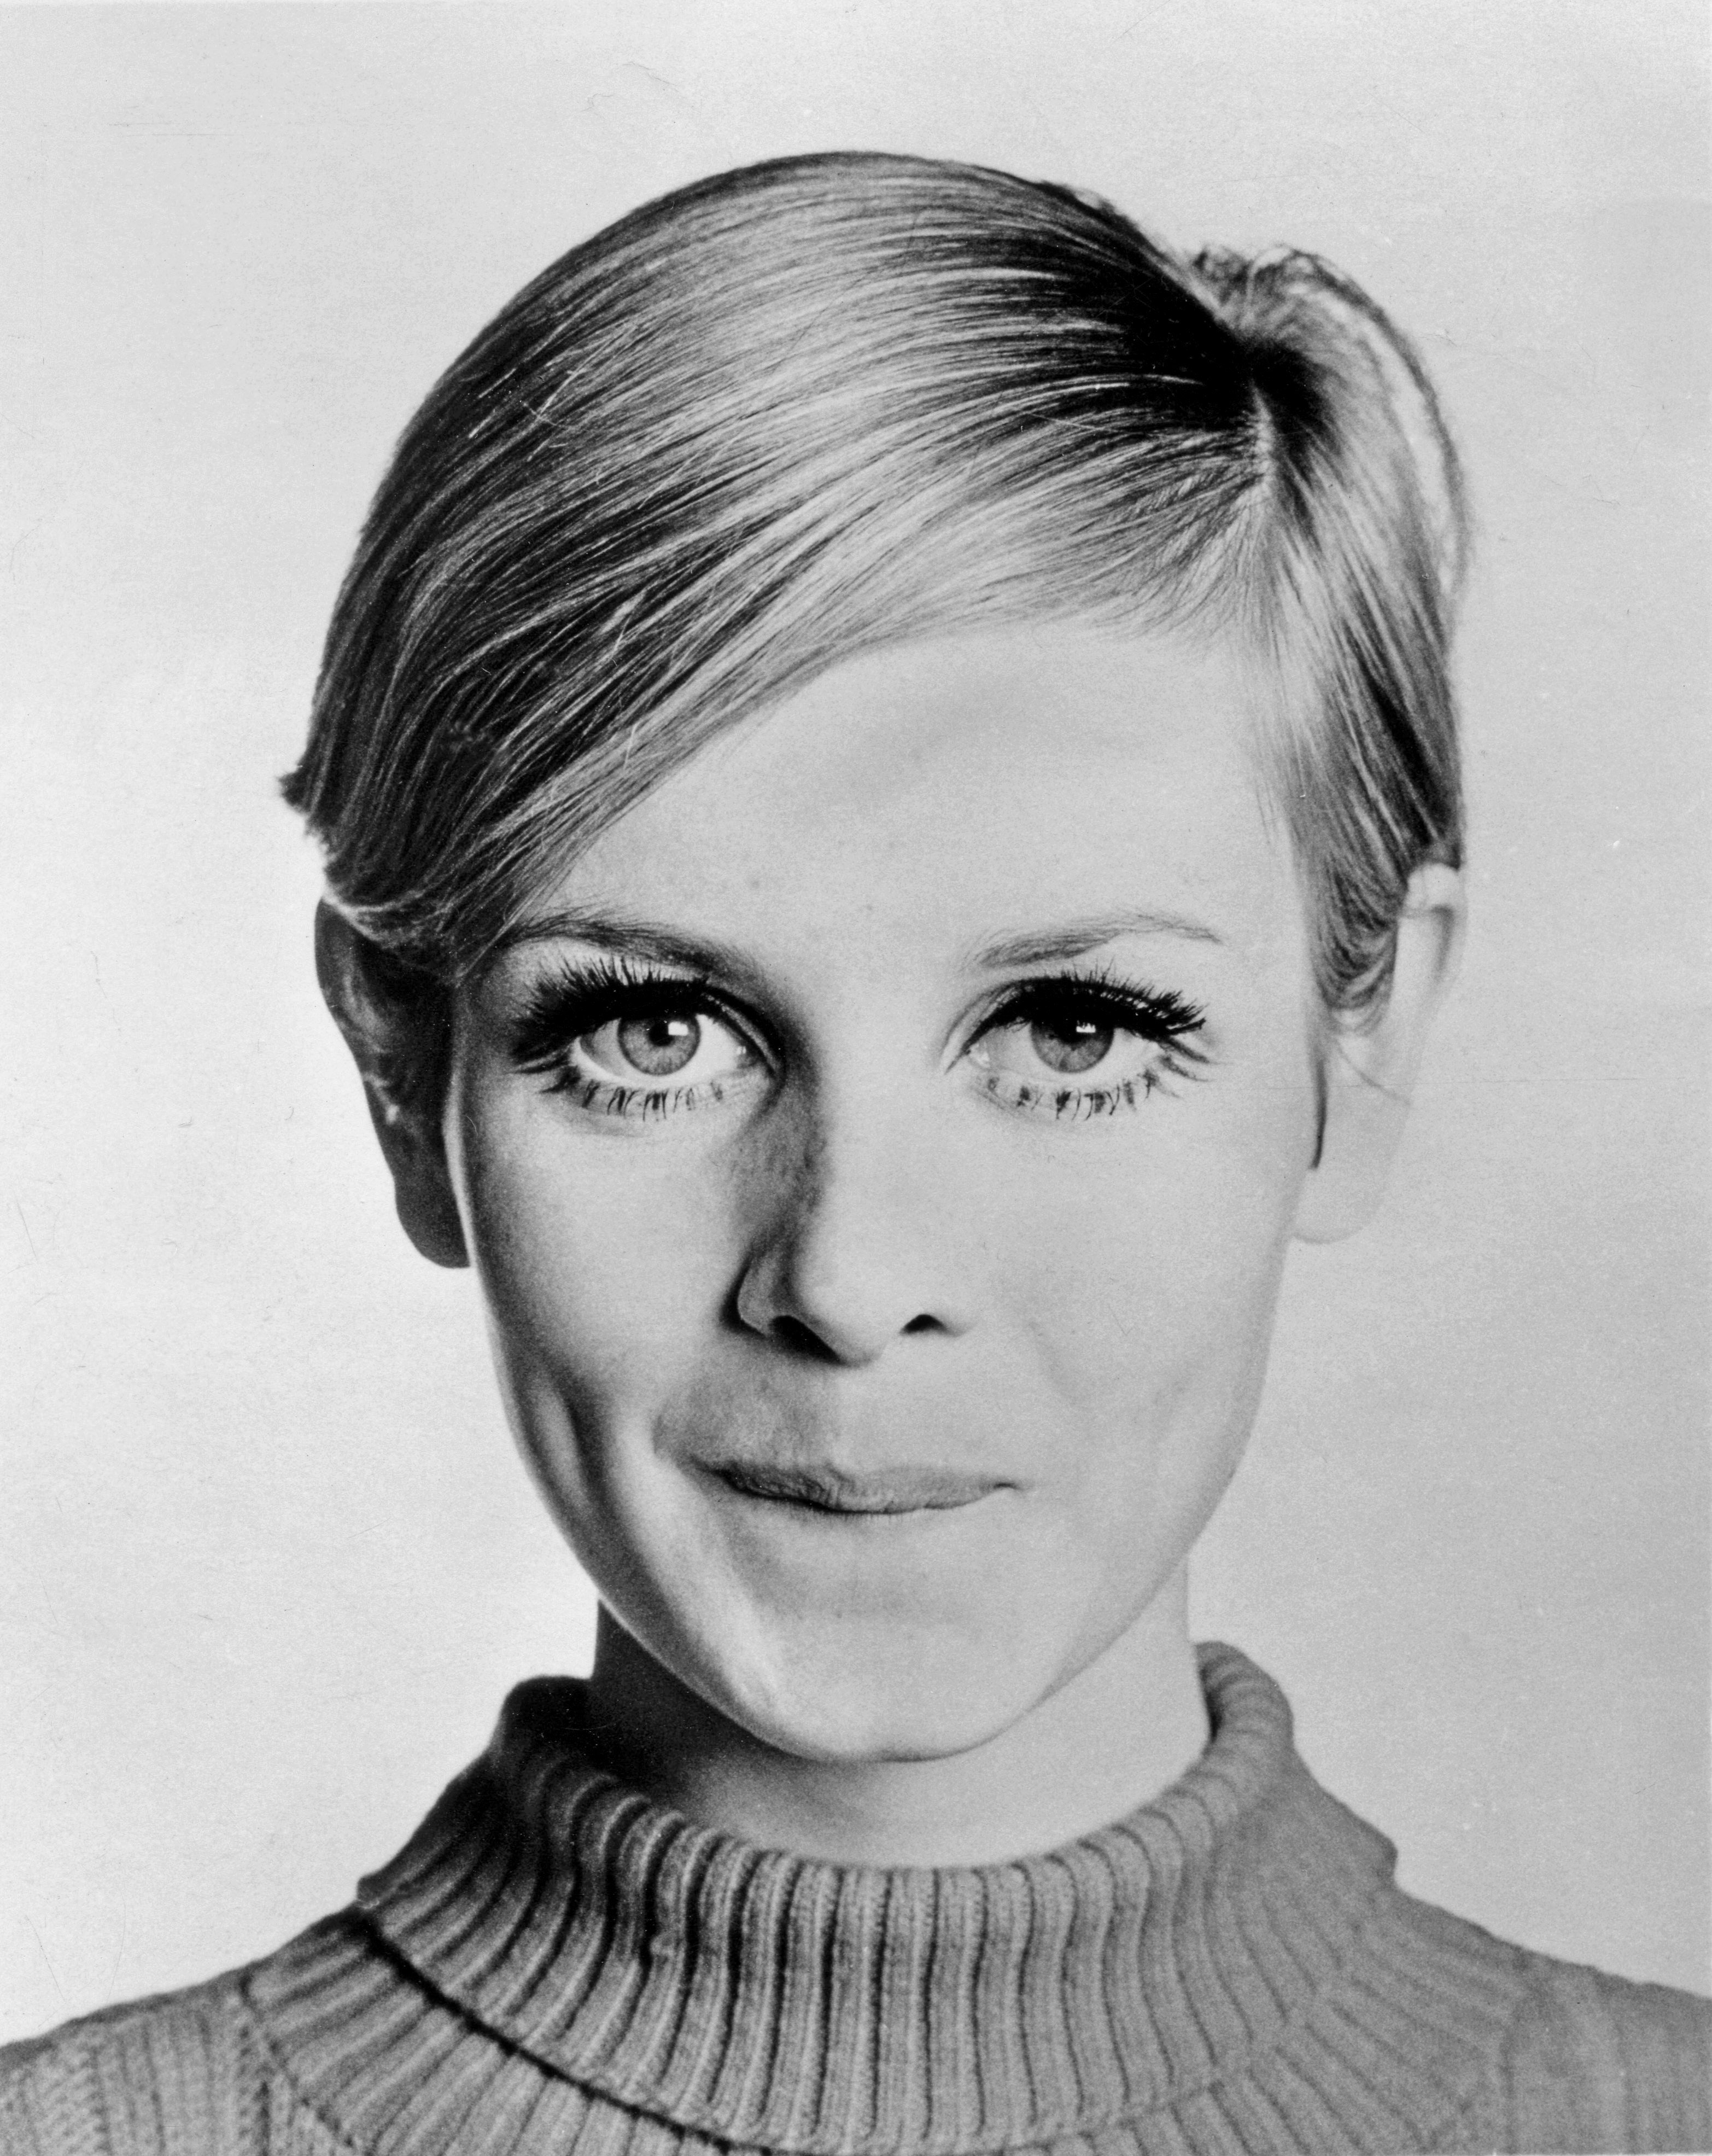 Image of Twiggy Bangs 60s hairstyle